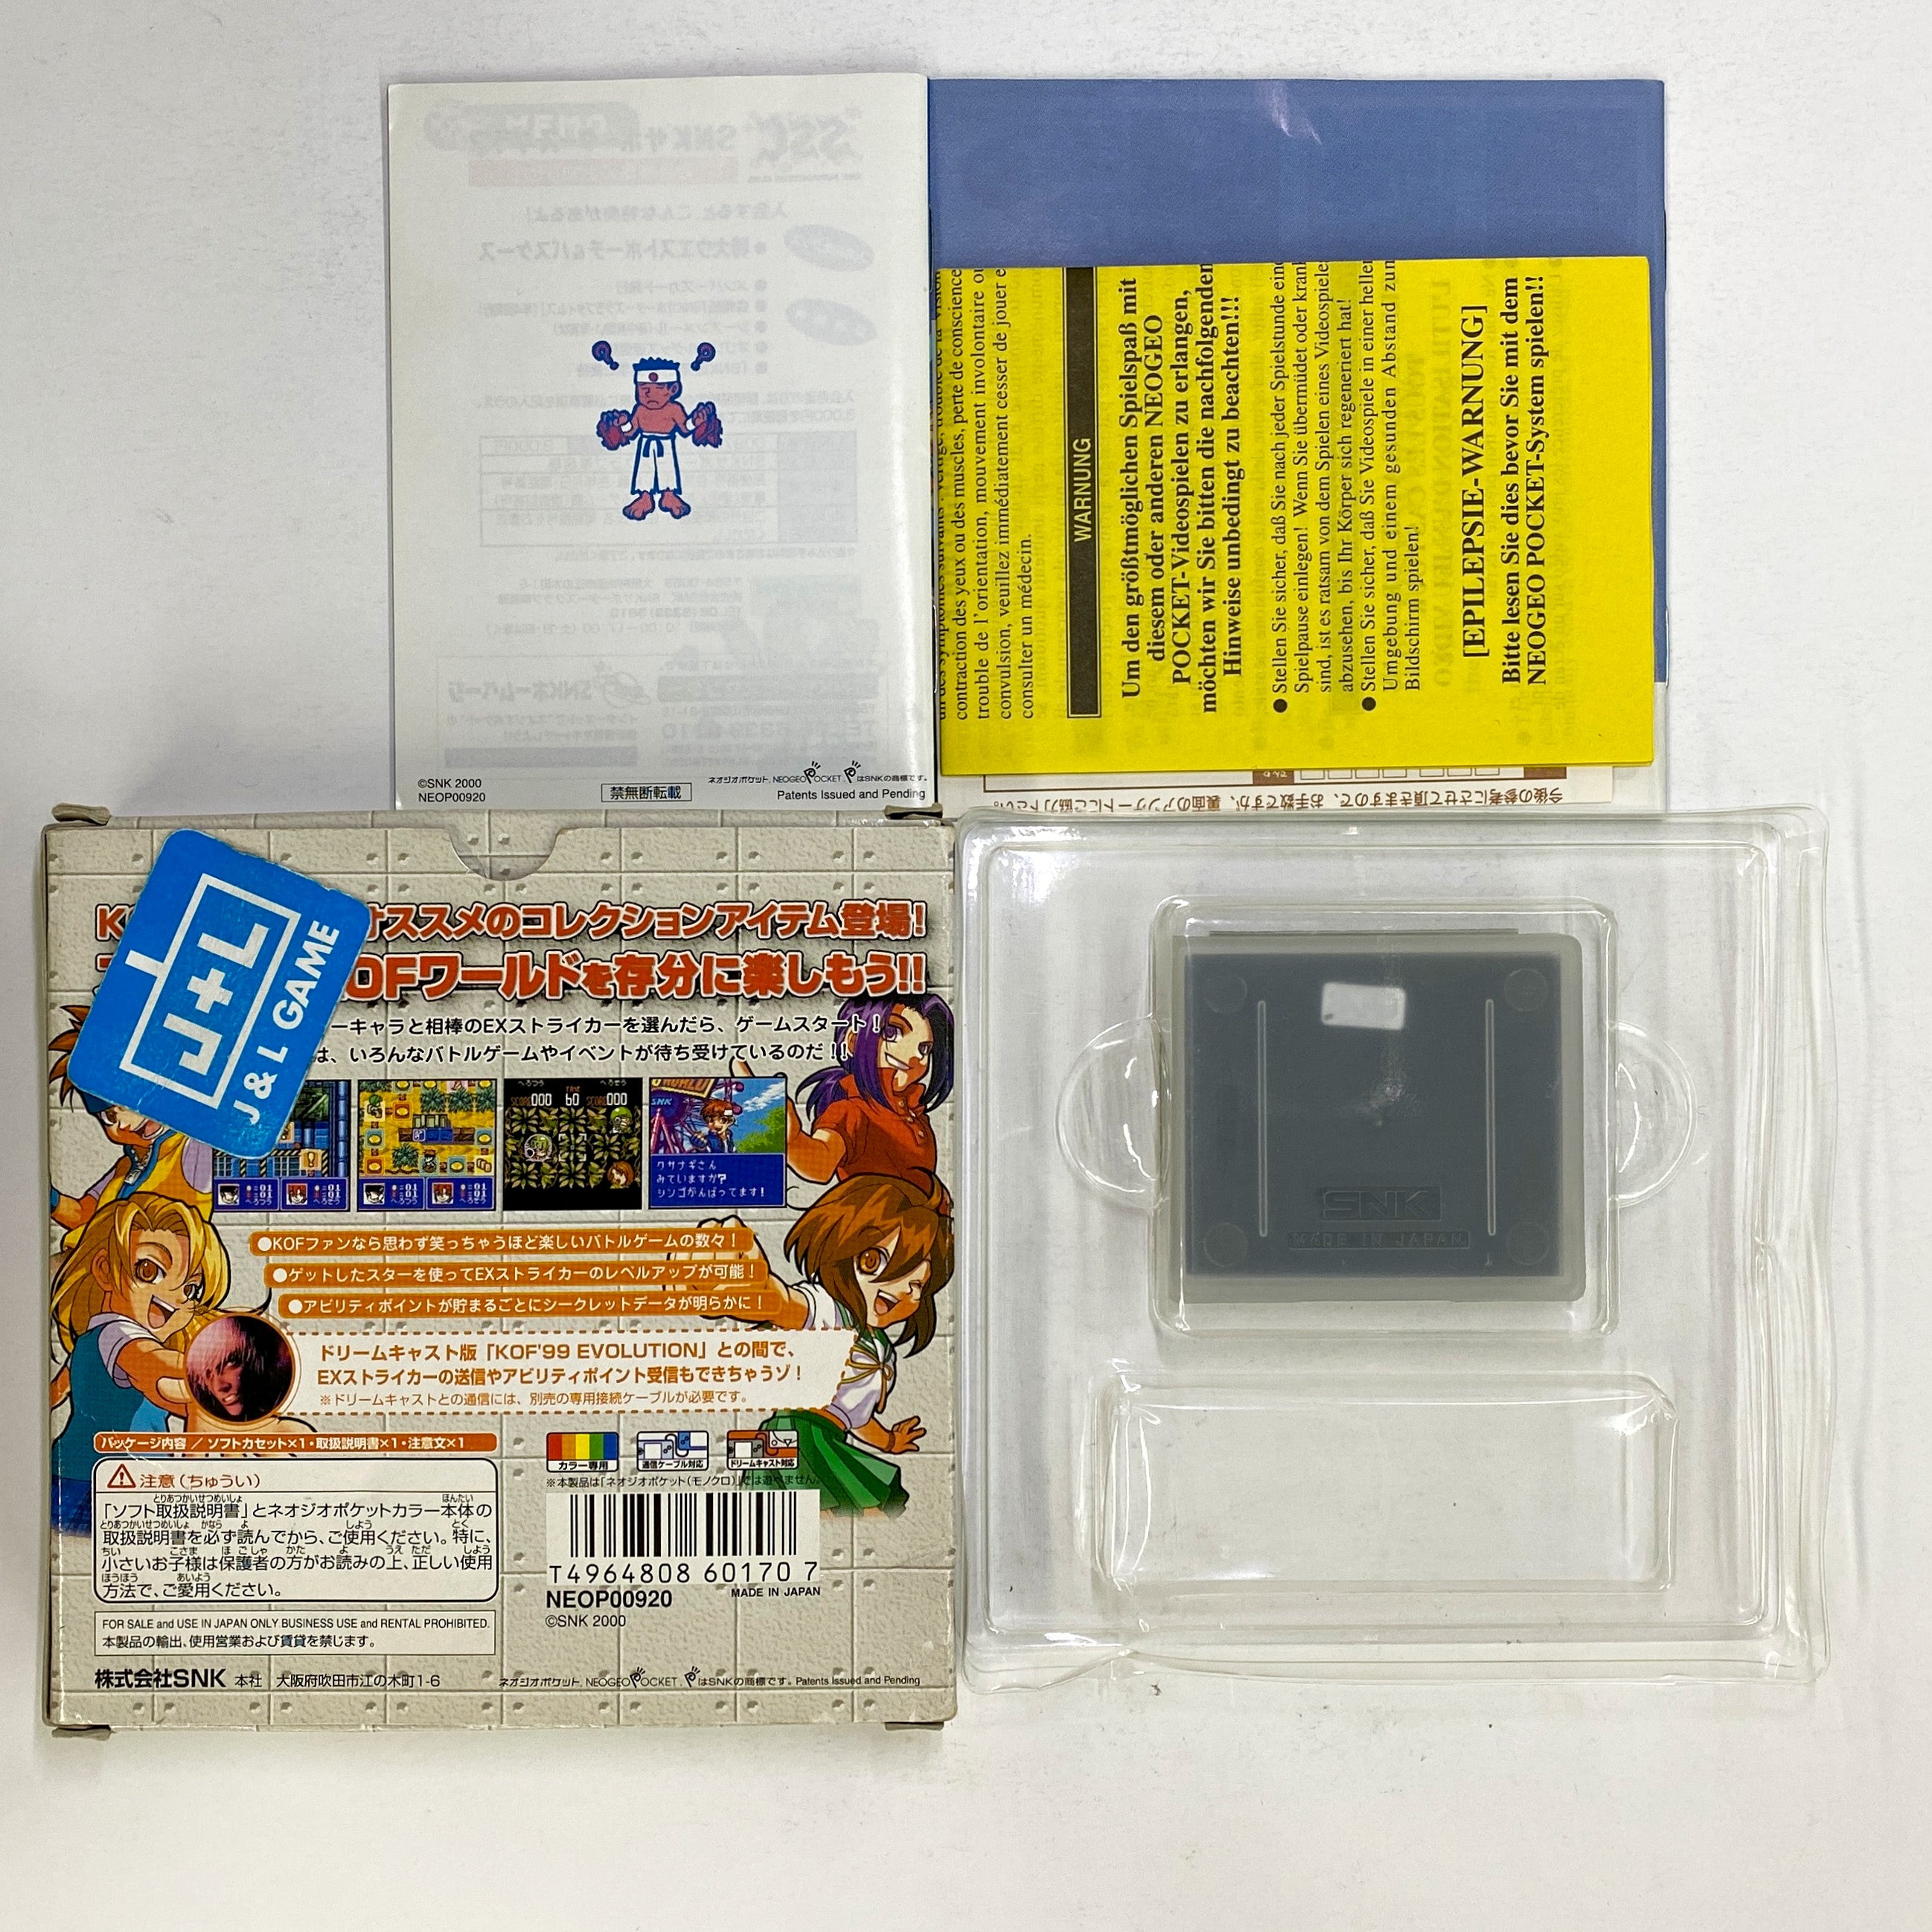 The King of Fighters: Battle de Paradise - SNK NeoGeo Pocket Color  (Japanese Import) [Pre-Owned]